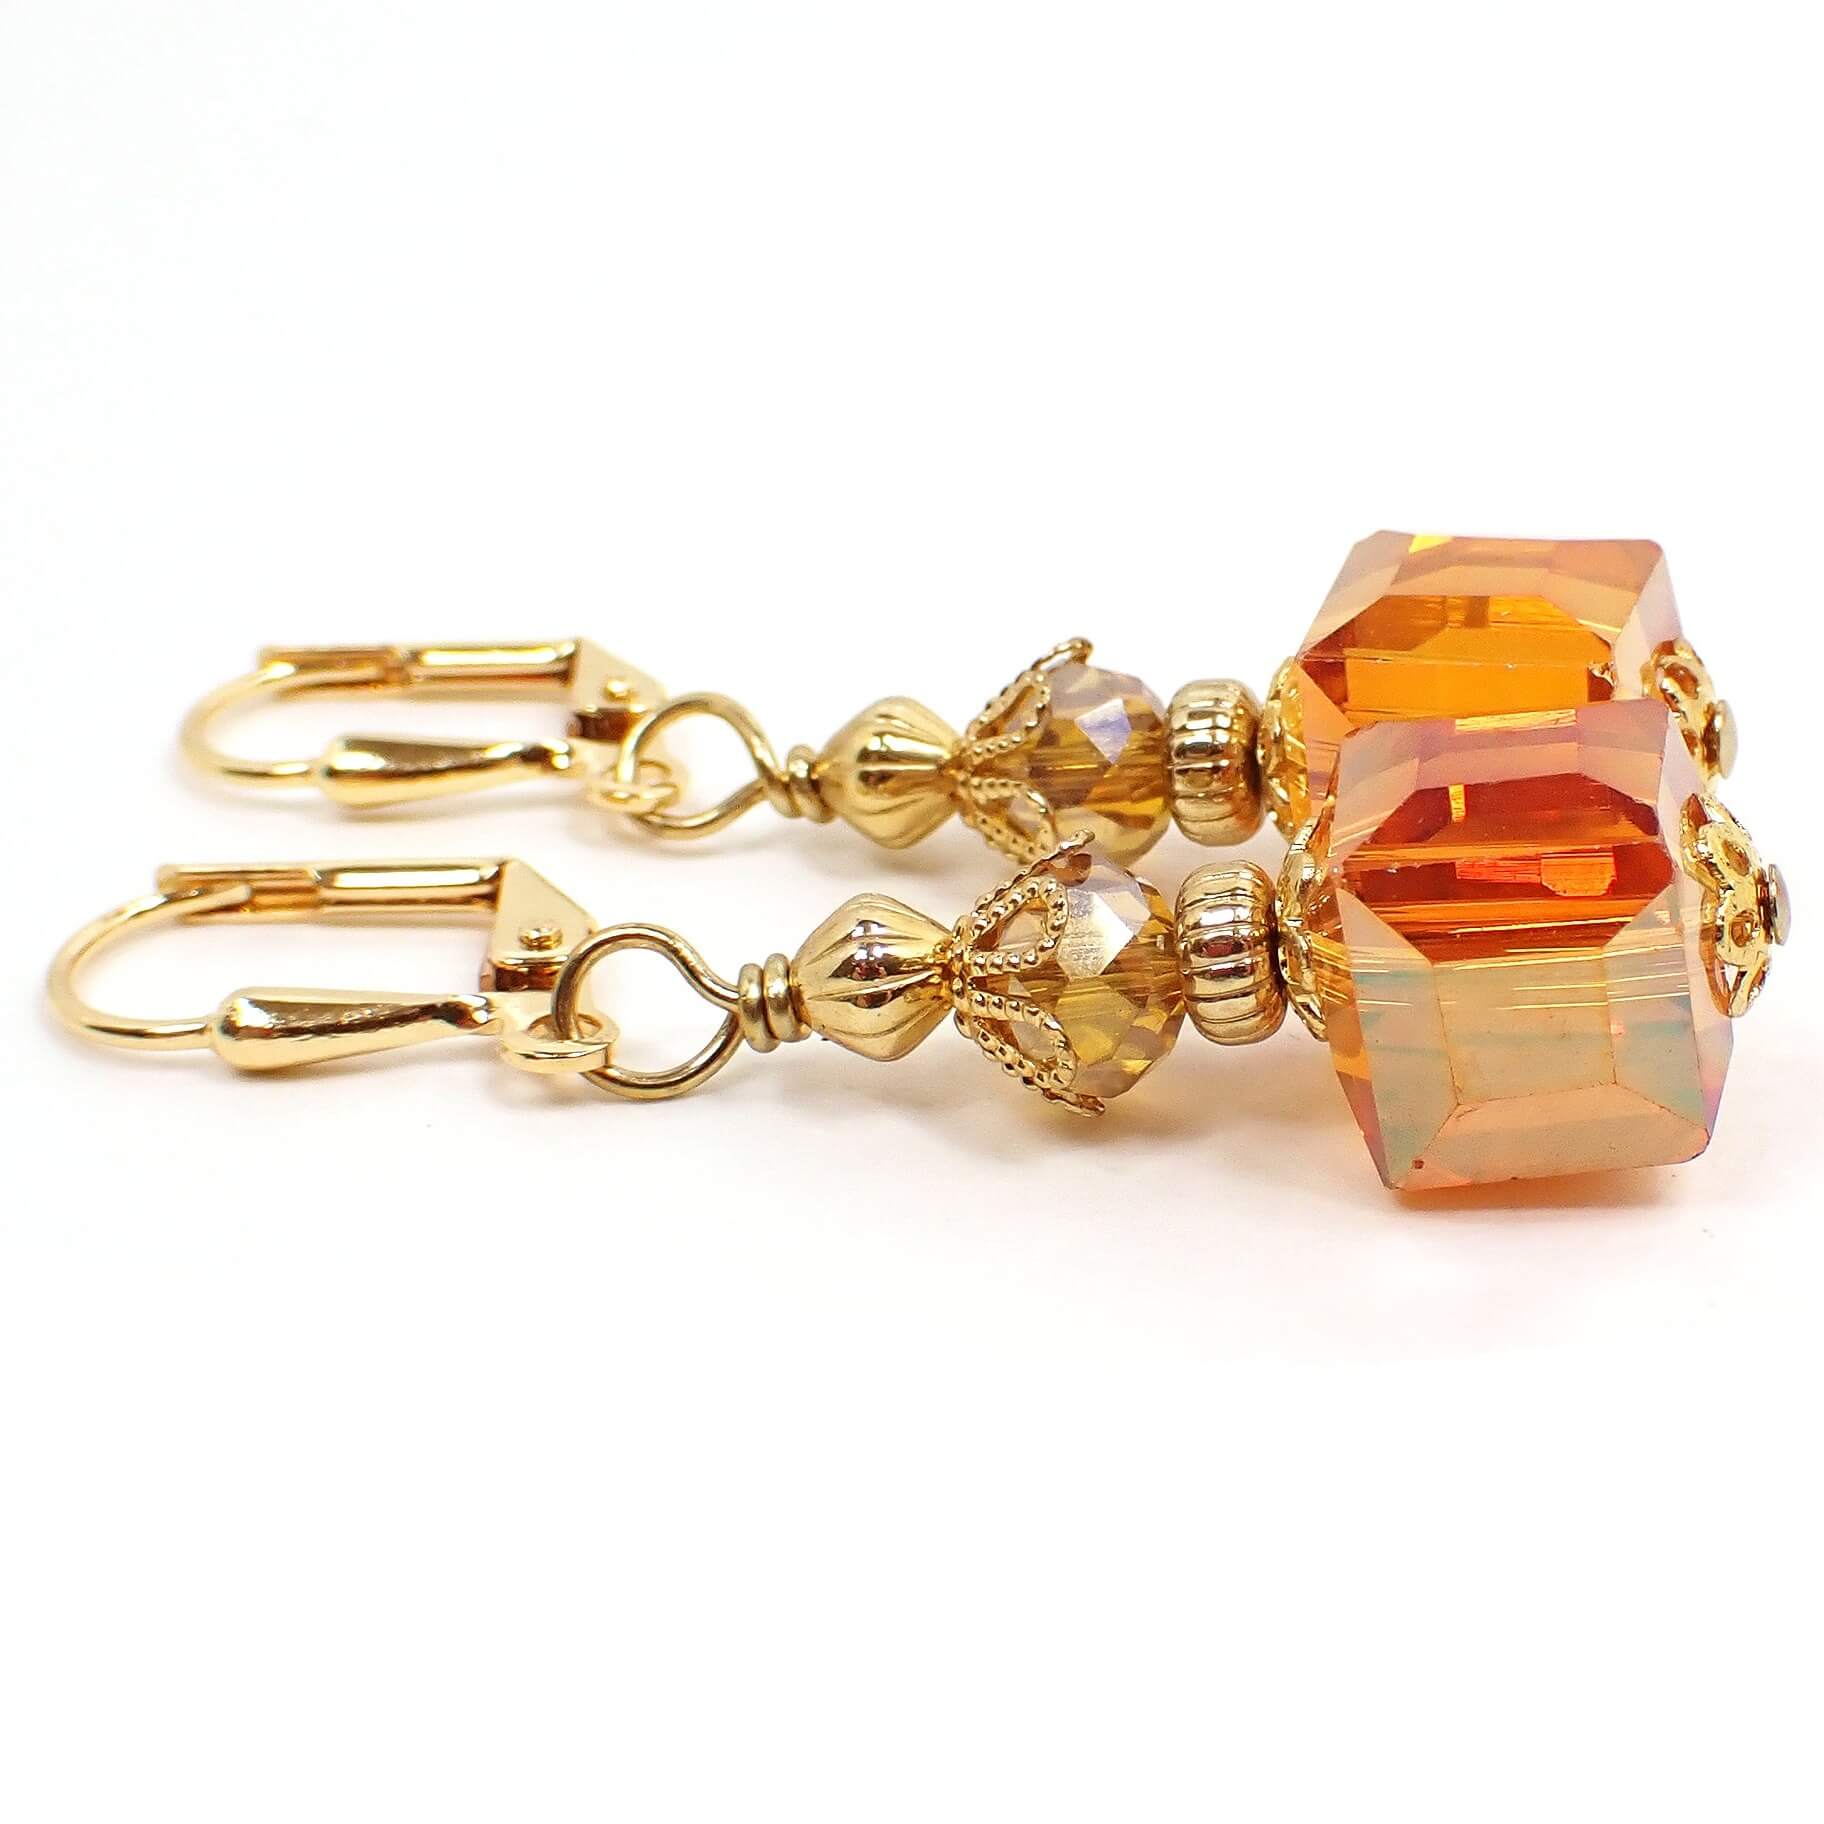 Side view of the handmade cube drop earrings. The metal is gold plated in color. There are faceted oval glass crystal beads at the top in a light orange color. The glass crystal cube beads at the bottom are mostly orange with hints of pink and yellow as you move around in the light.